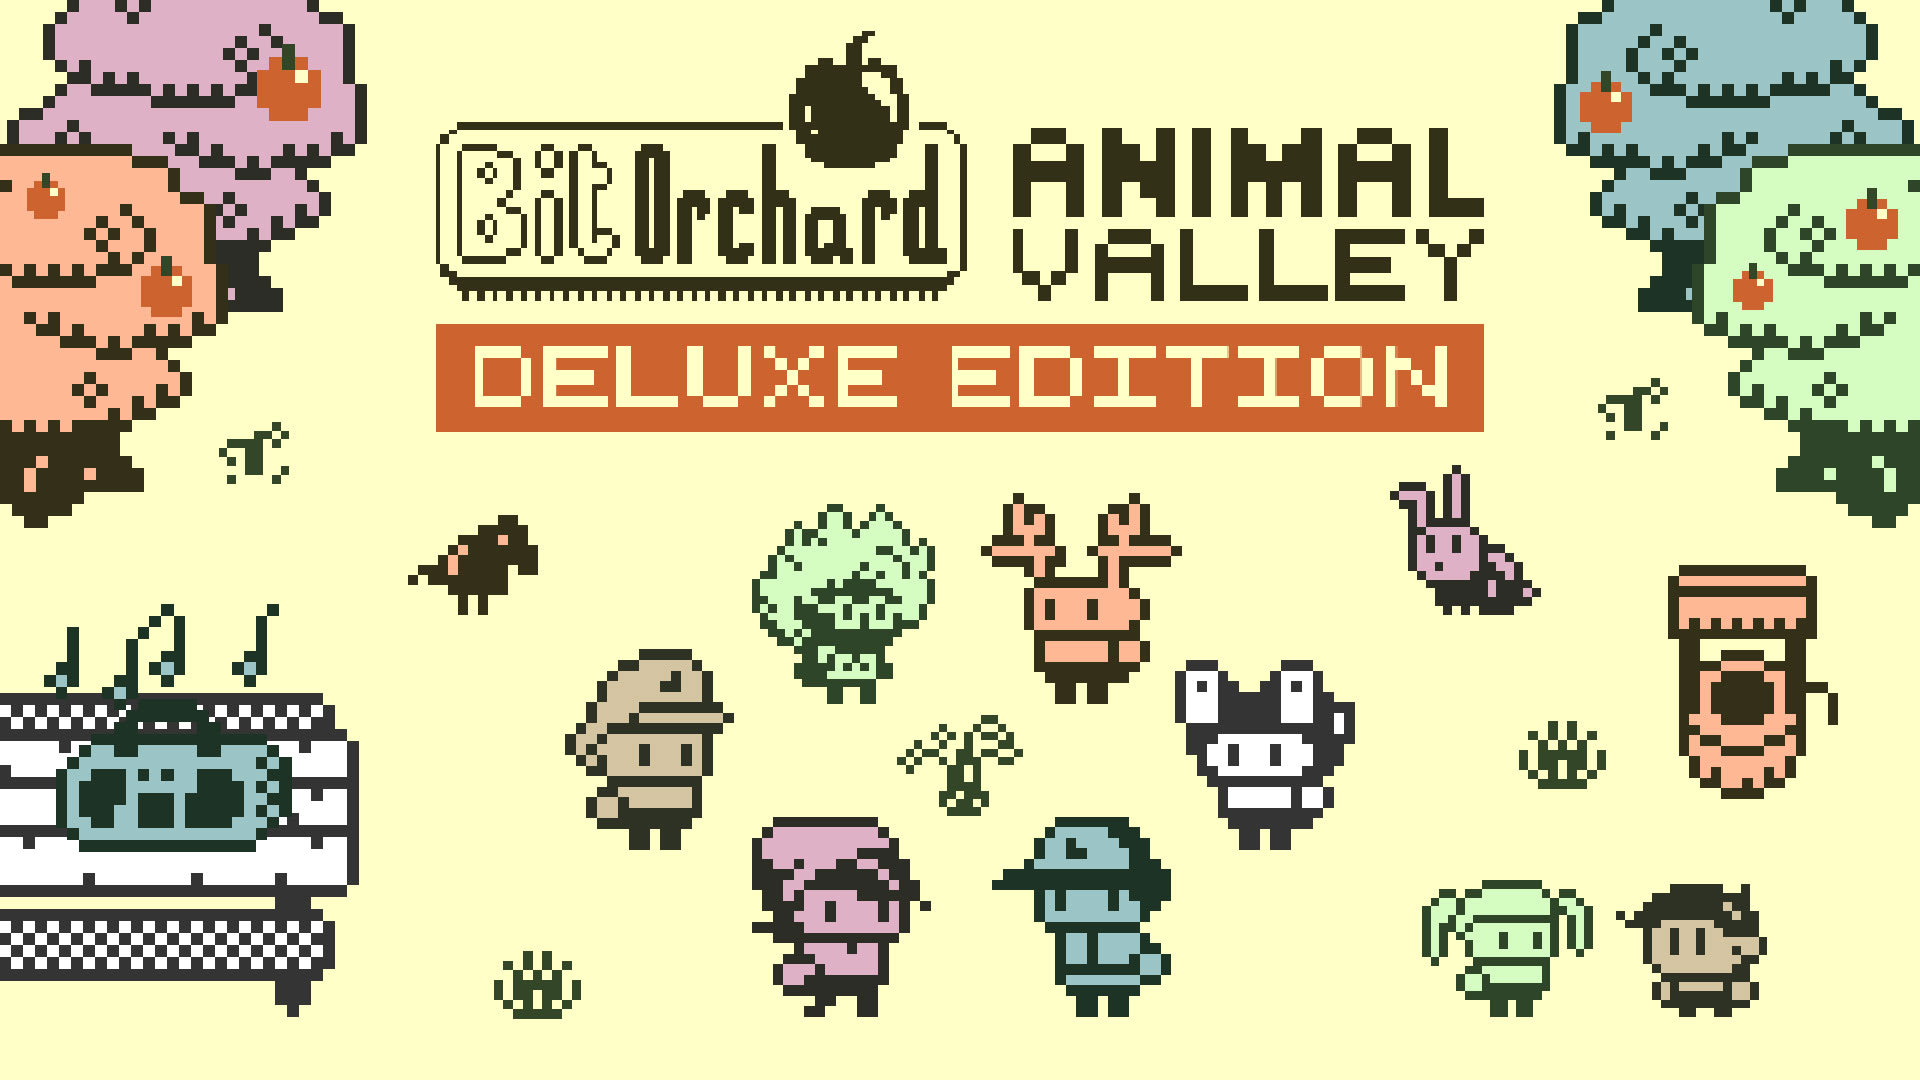 Bit Orchard: Animal Valley Deluxe Edition